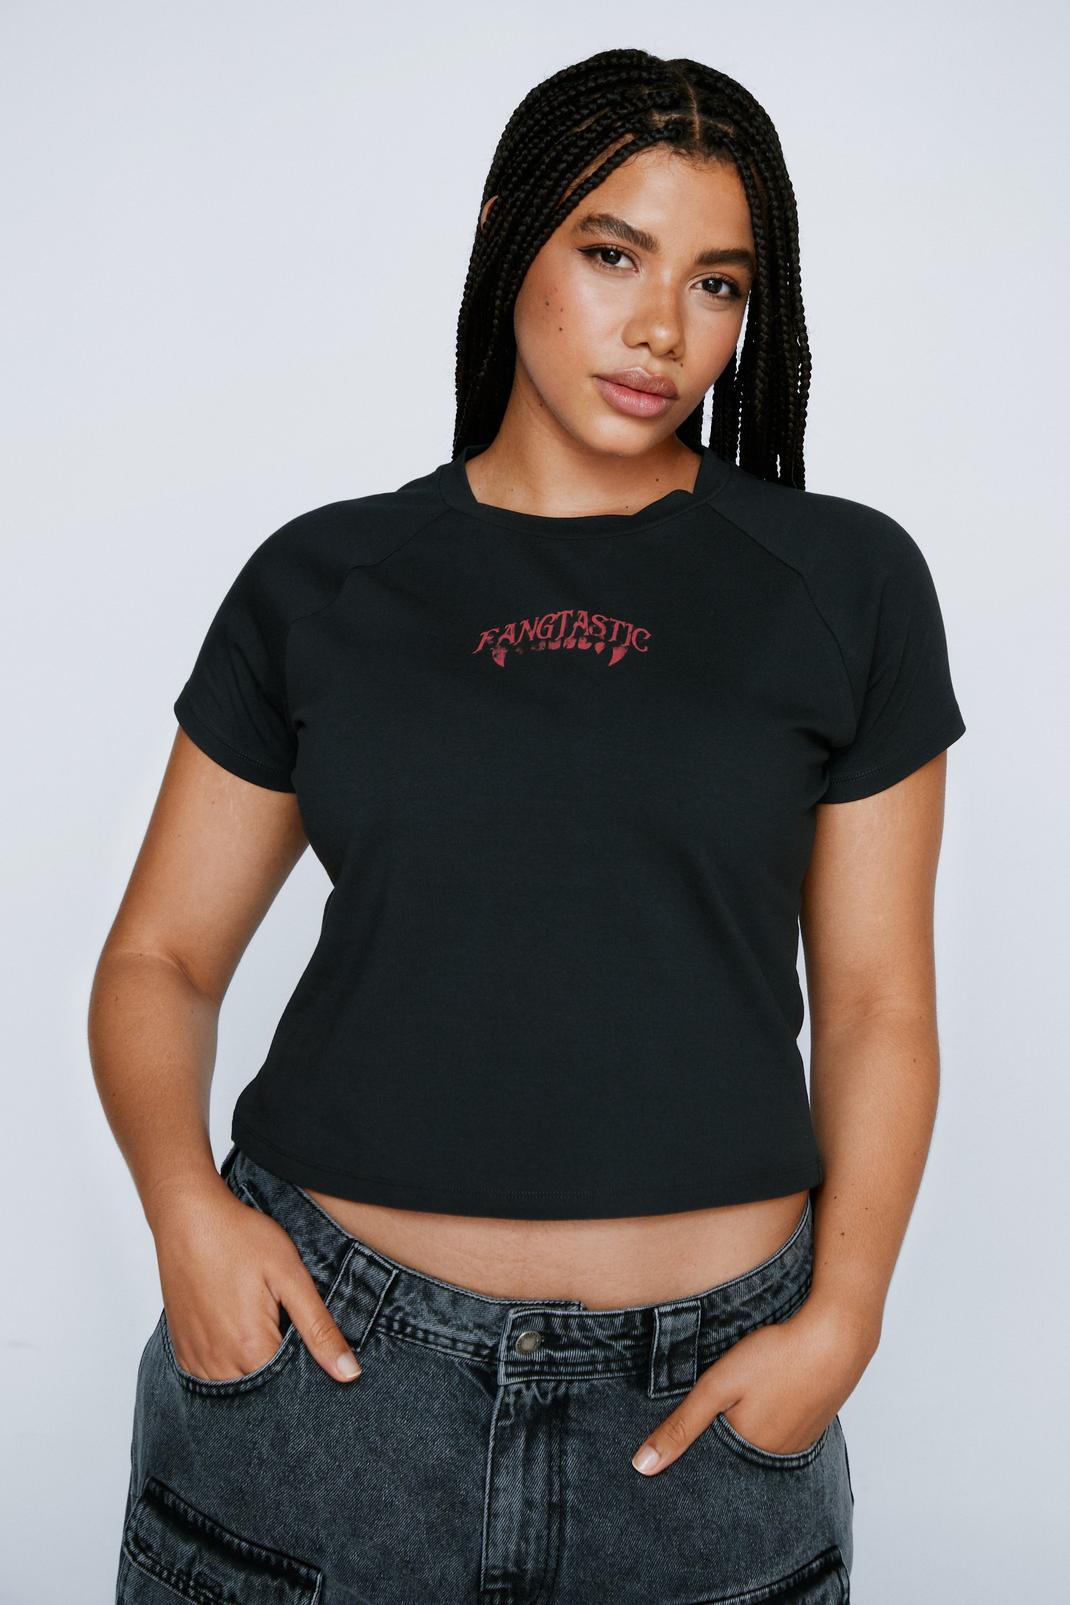 Black Plus Size Fangtastic Graphic Baby Tee image number 1